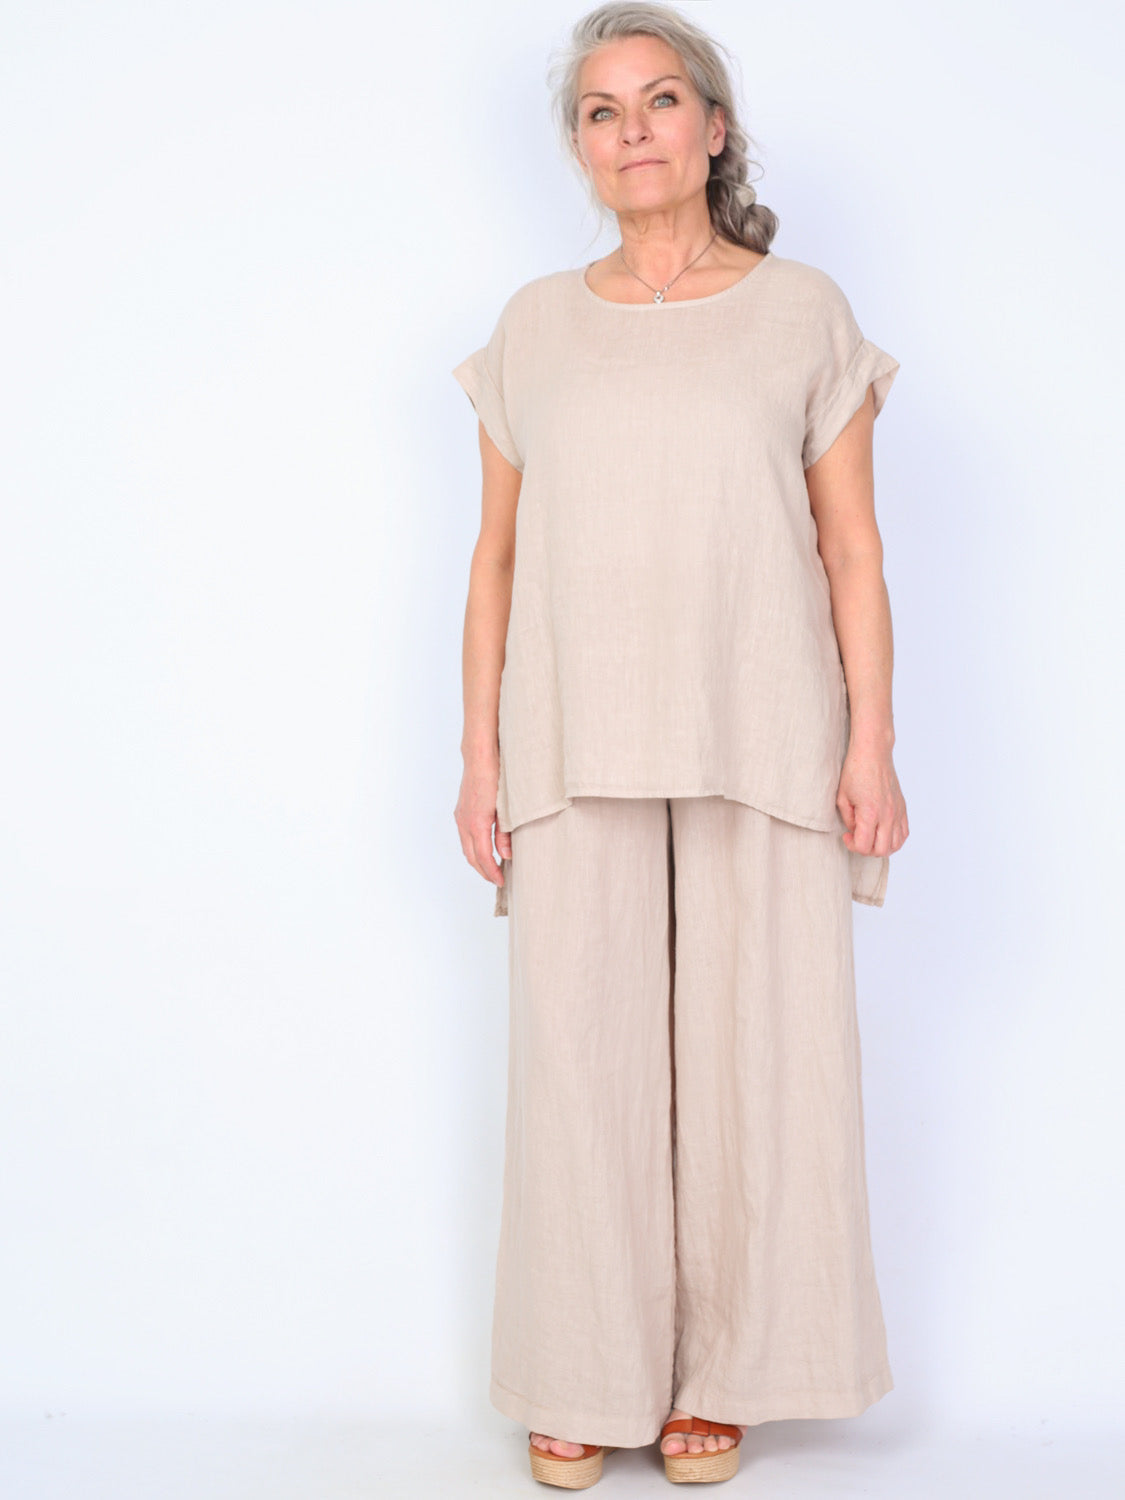 Krone 1 linen blouse with folds at the sleeve